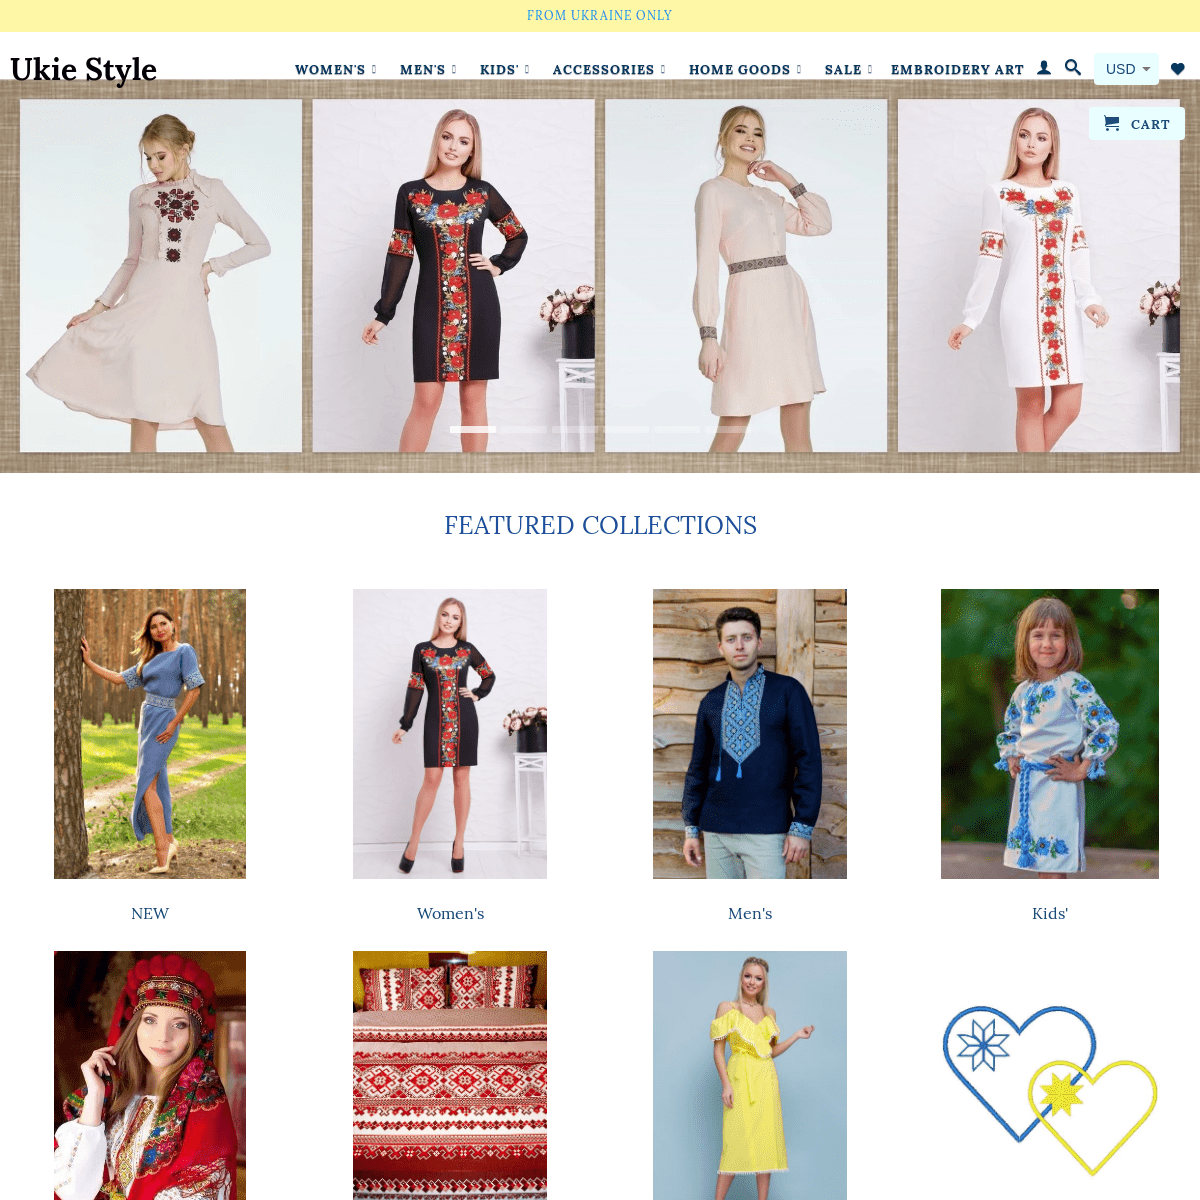 UKRAINIAN FASHION IS A UNIQUE STYLE CLOTHING AND ACCESSORIES